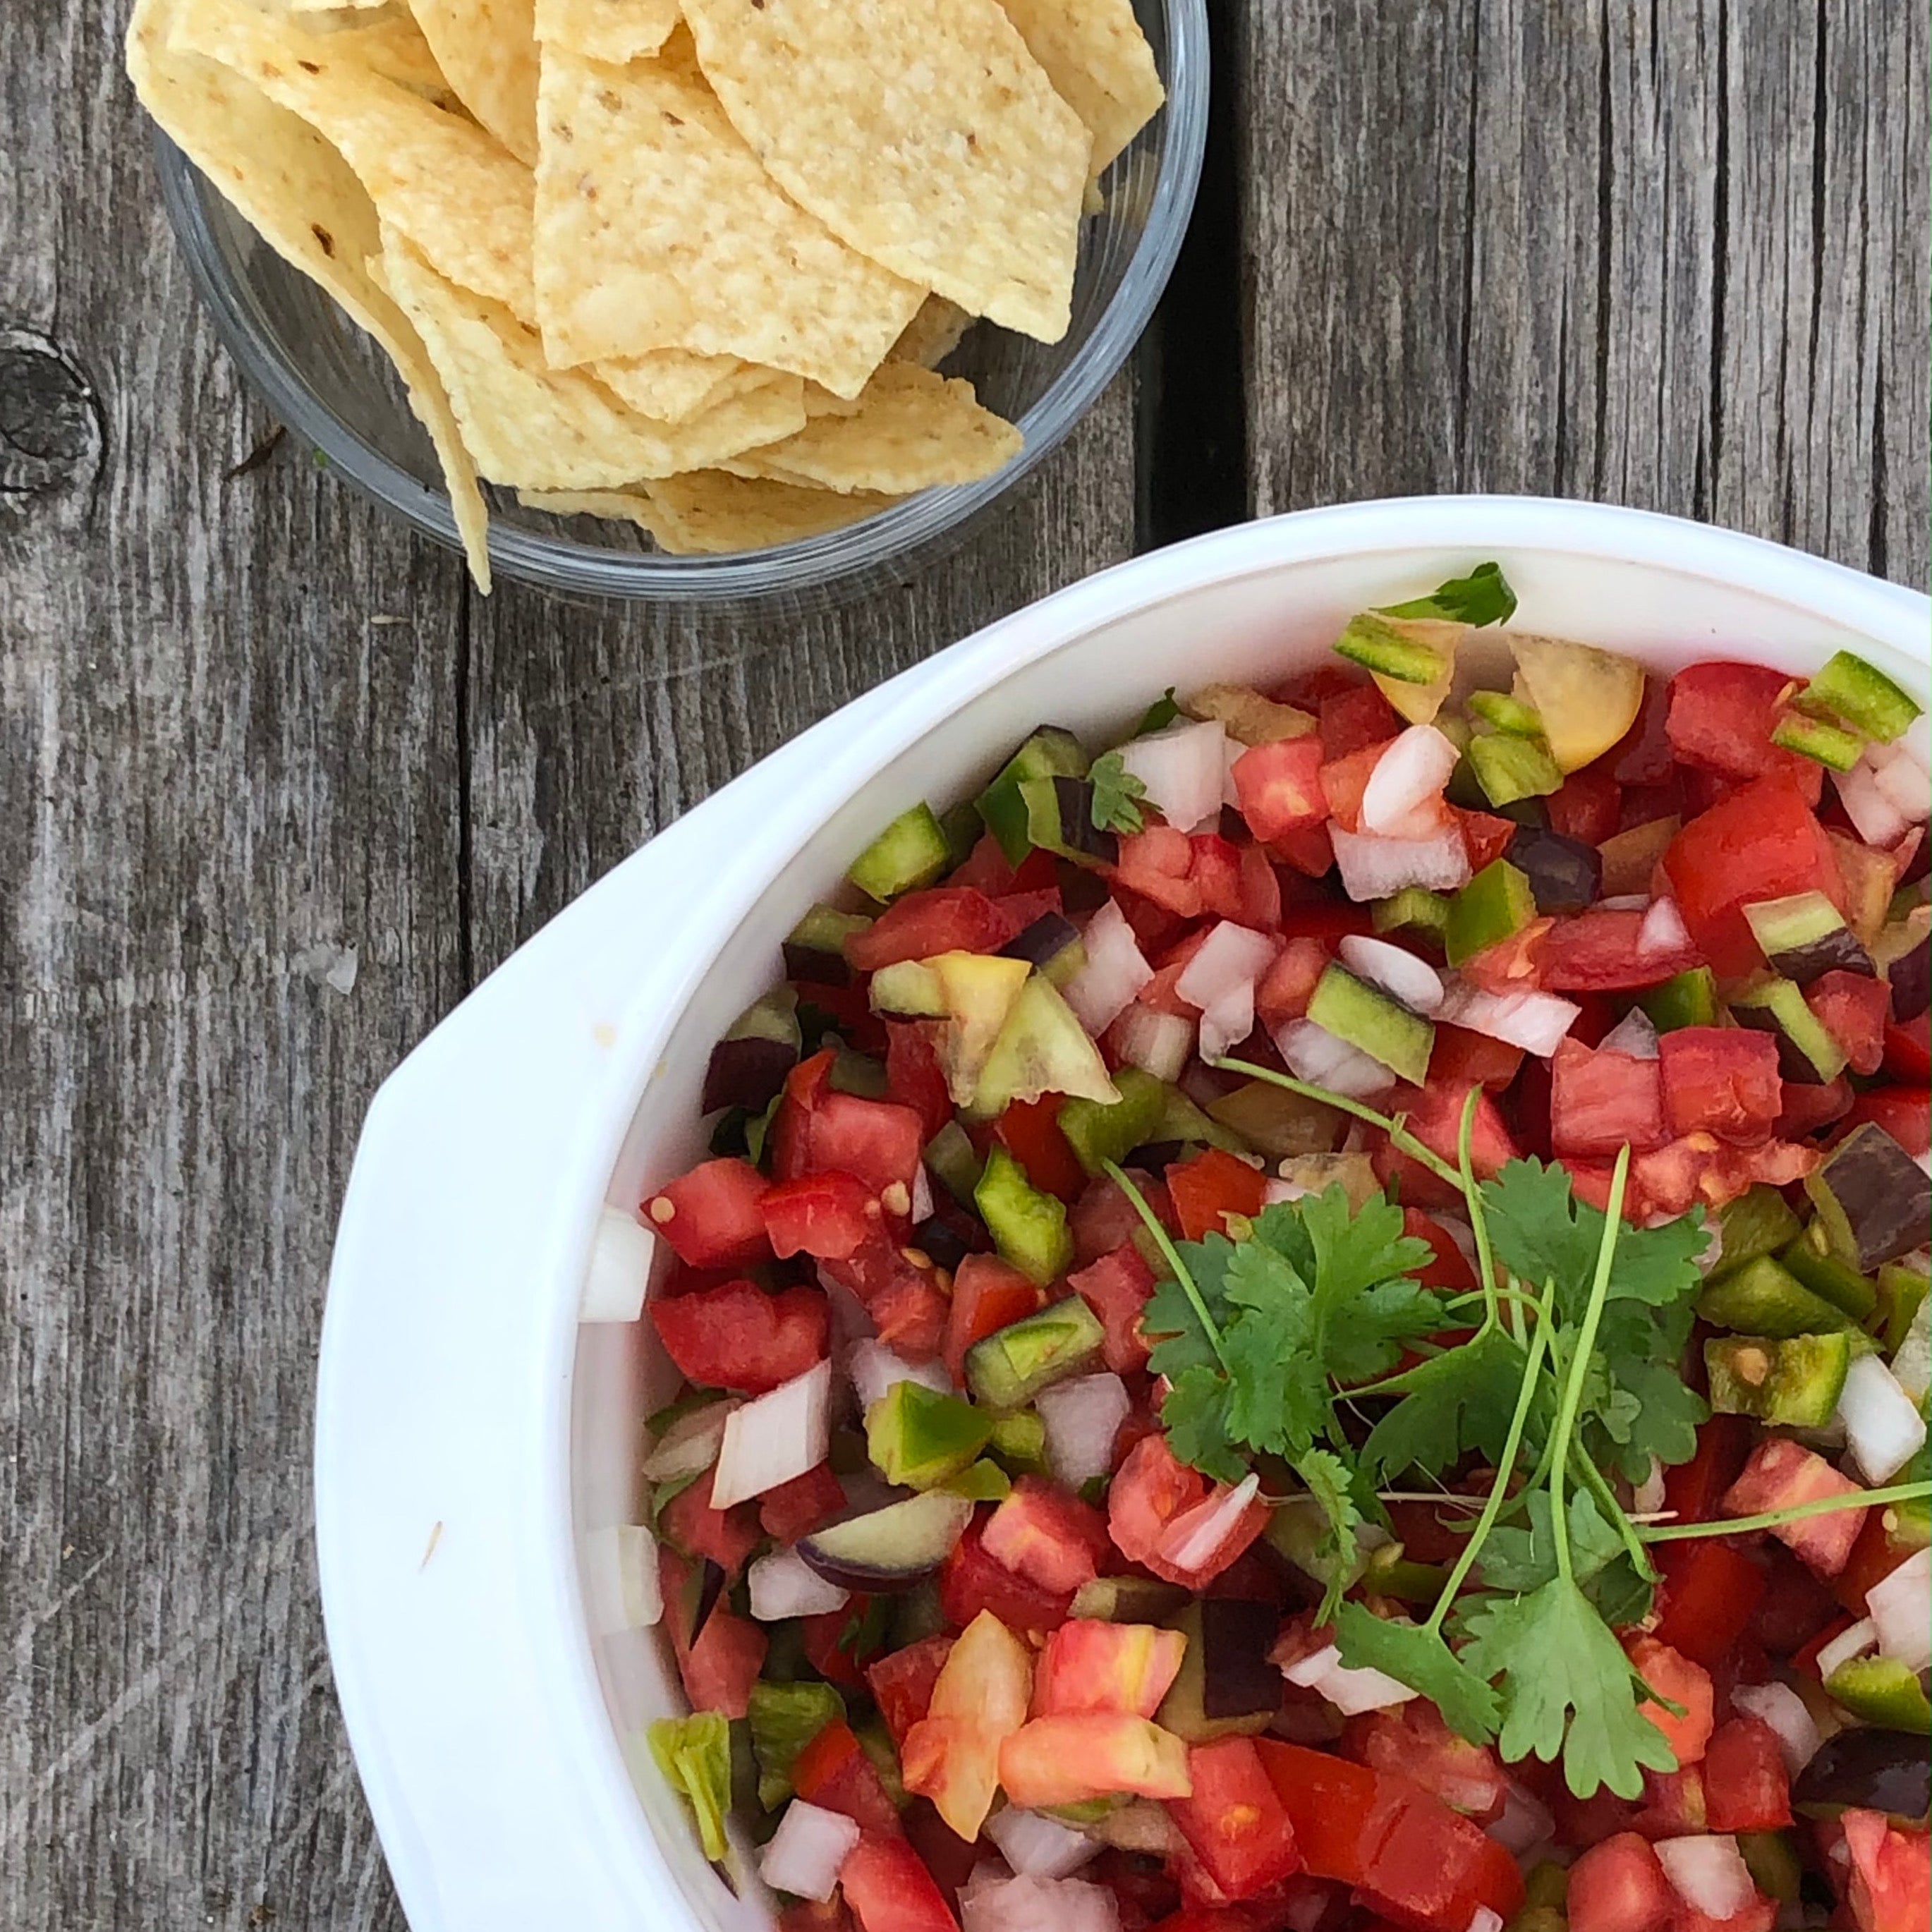 Looking for an easy garden-fresh recipe? Try this delicious 10-minute salsa fresca!